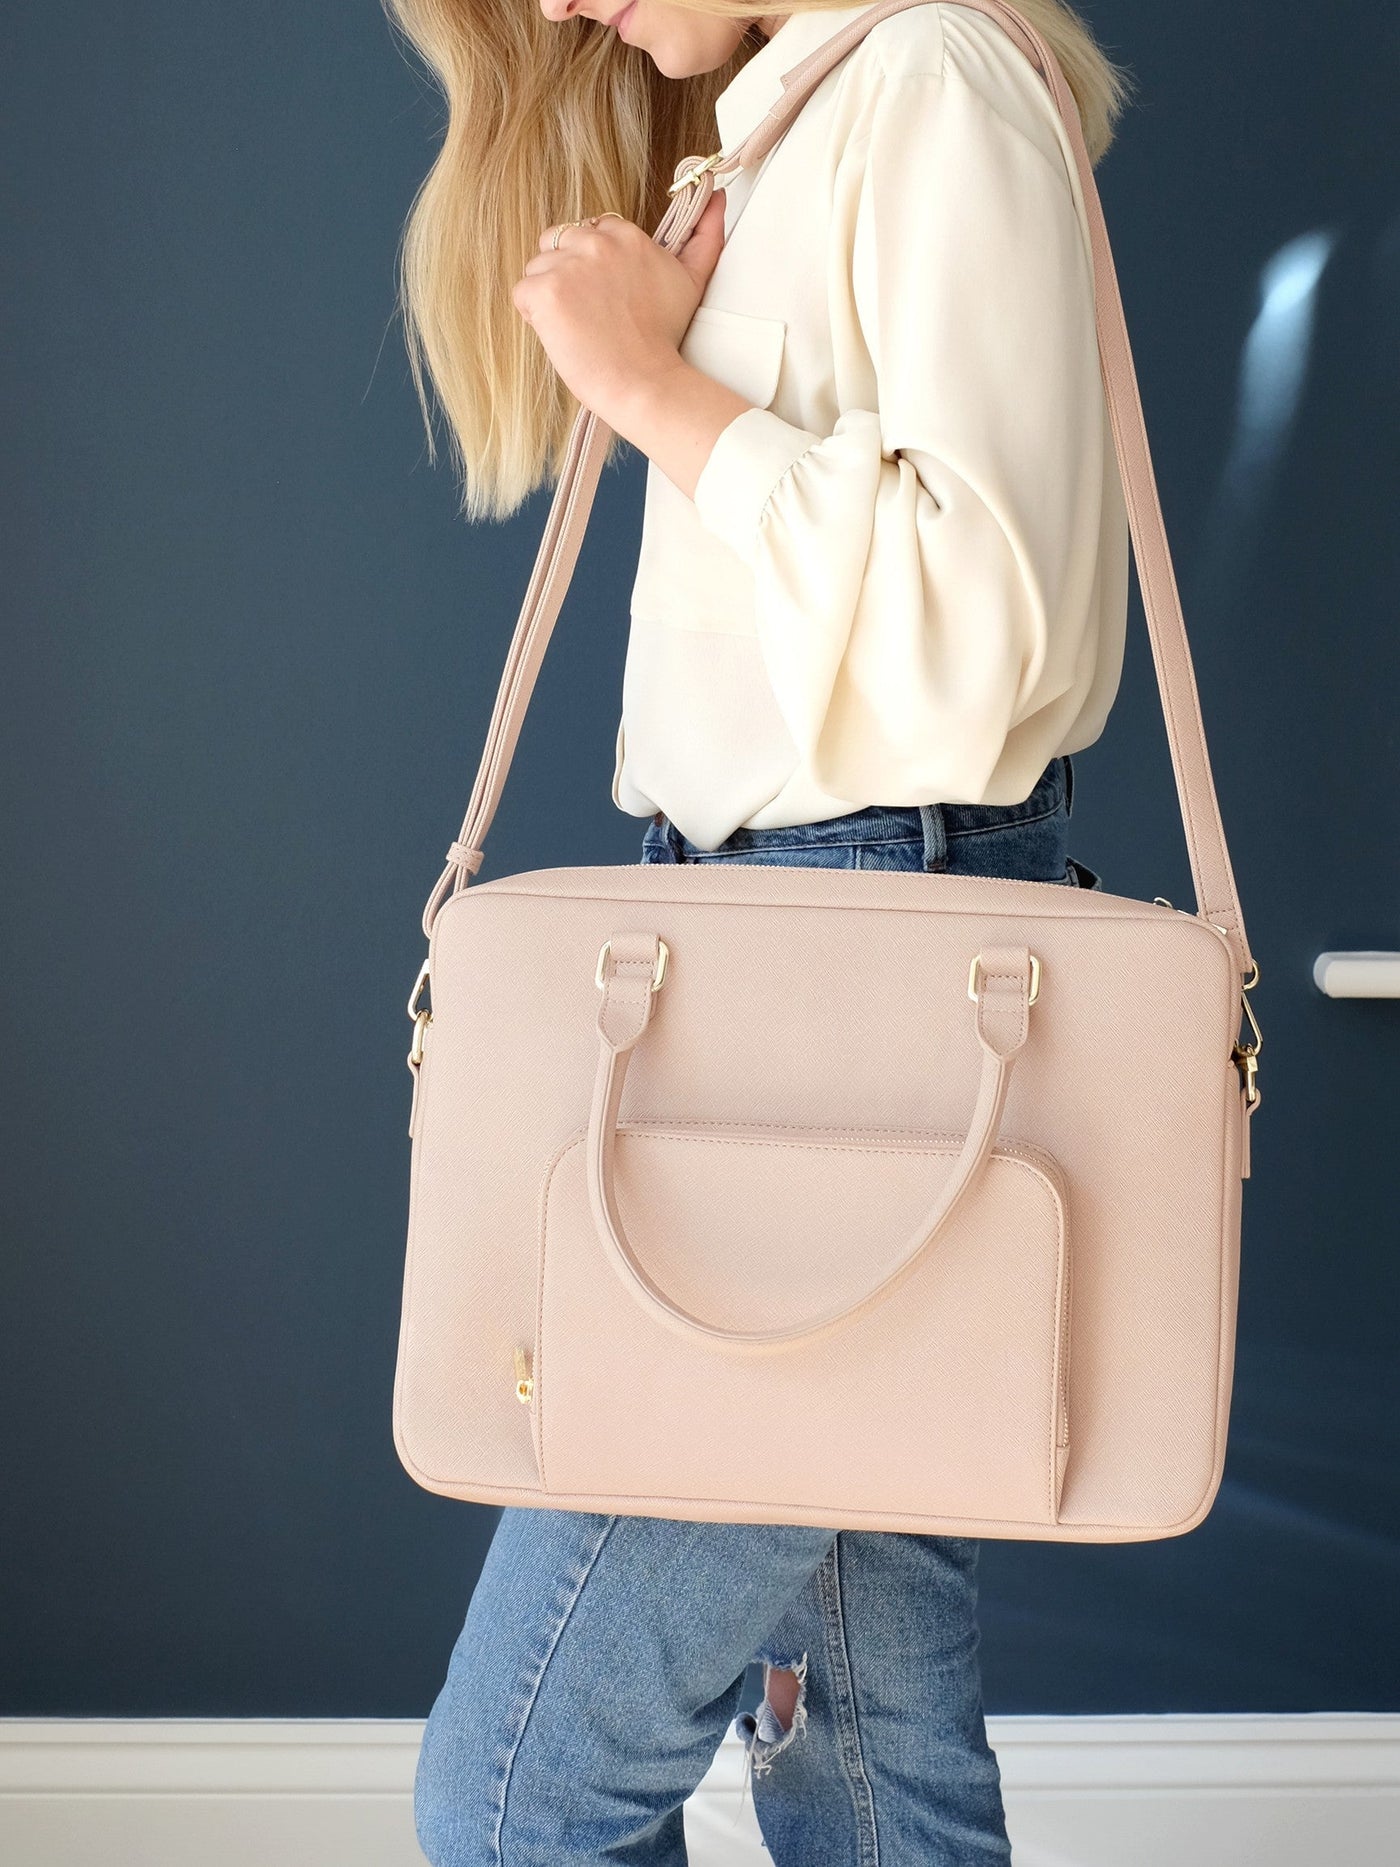 Stackers. Blush & Gold Laptop Bag *STOCK DUE MARCH* - timeframedclocks